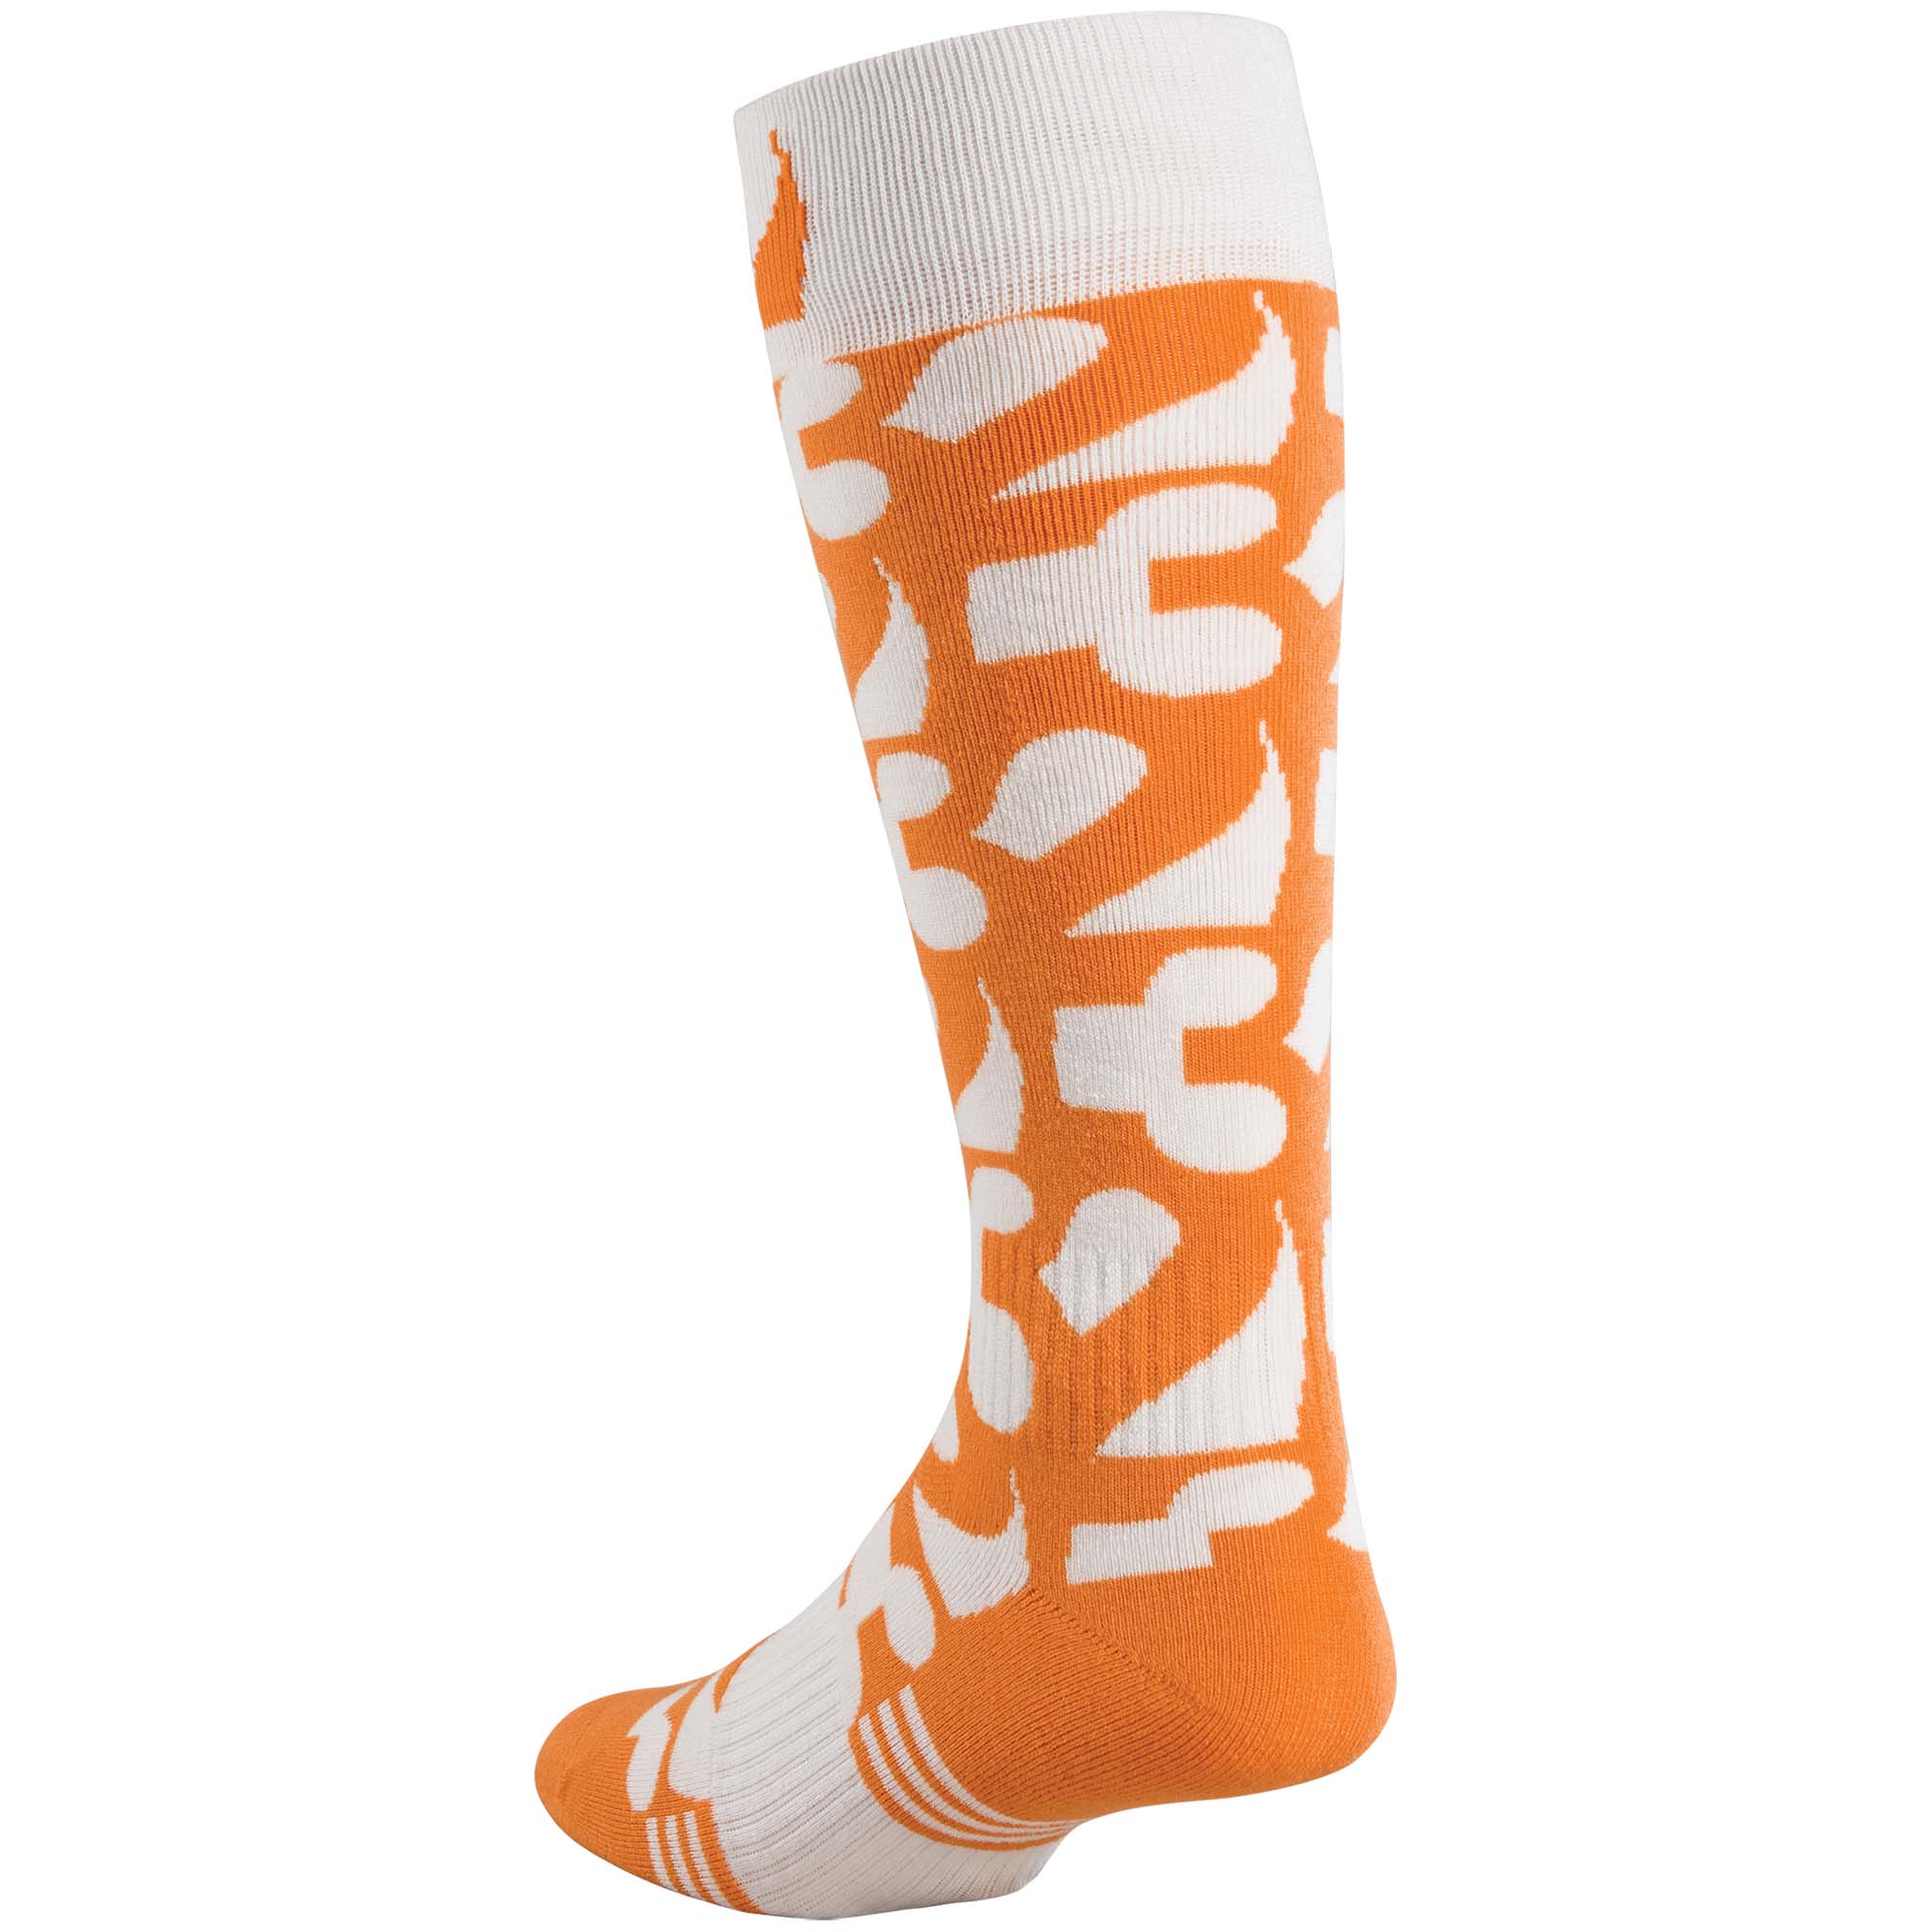 thirtytwo Cut Out 3-Pack Snowboard/Ski Socks